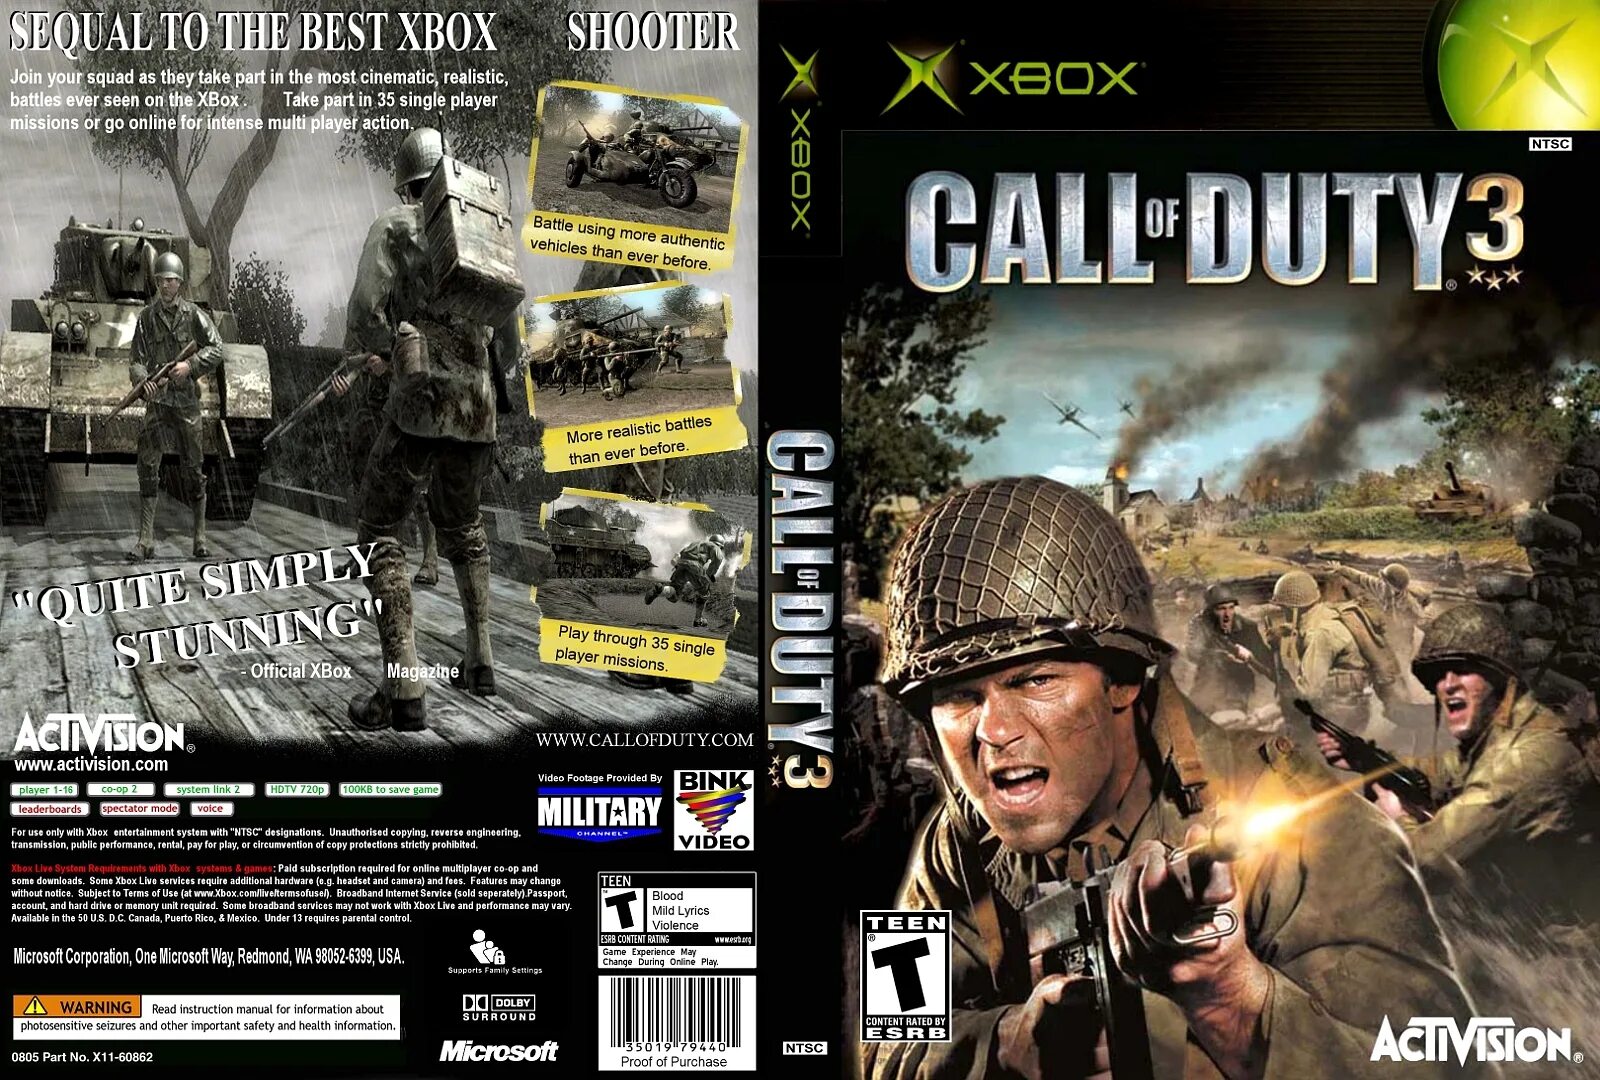 Call of Duty 3 Xbox 360 диск. Call of Duty 3 Xbox 360 обложка. Call of Duty 3 ps2 обложка. Call of Duty 2 PS 2 диск. Диск игры call of duty